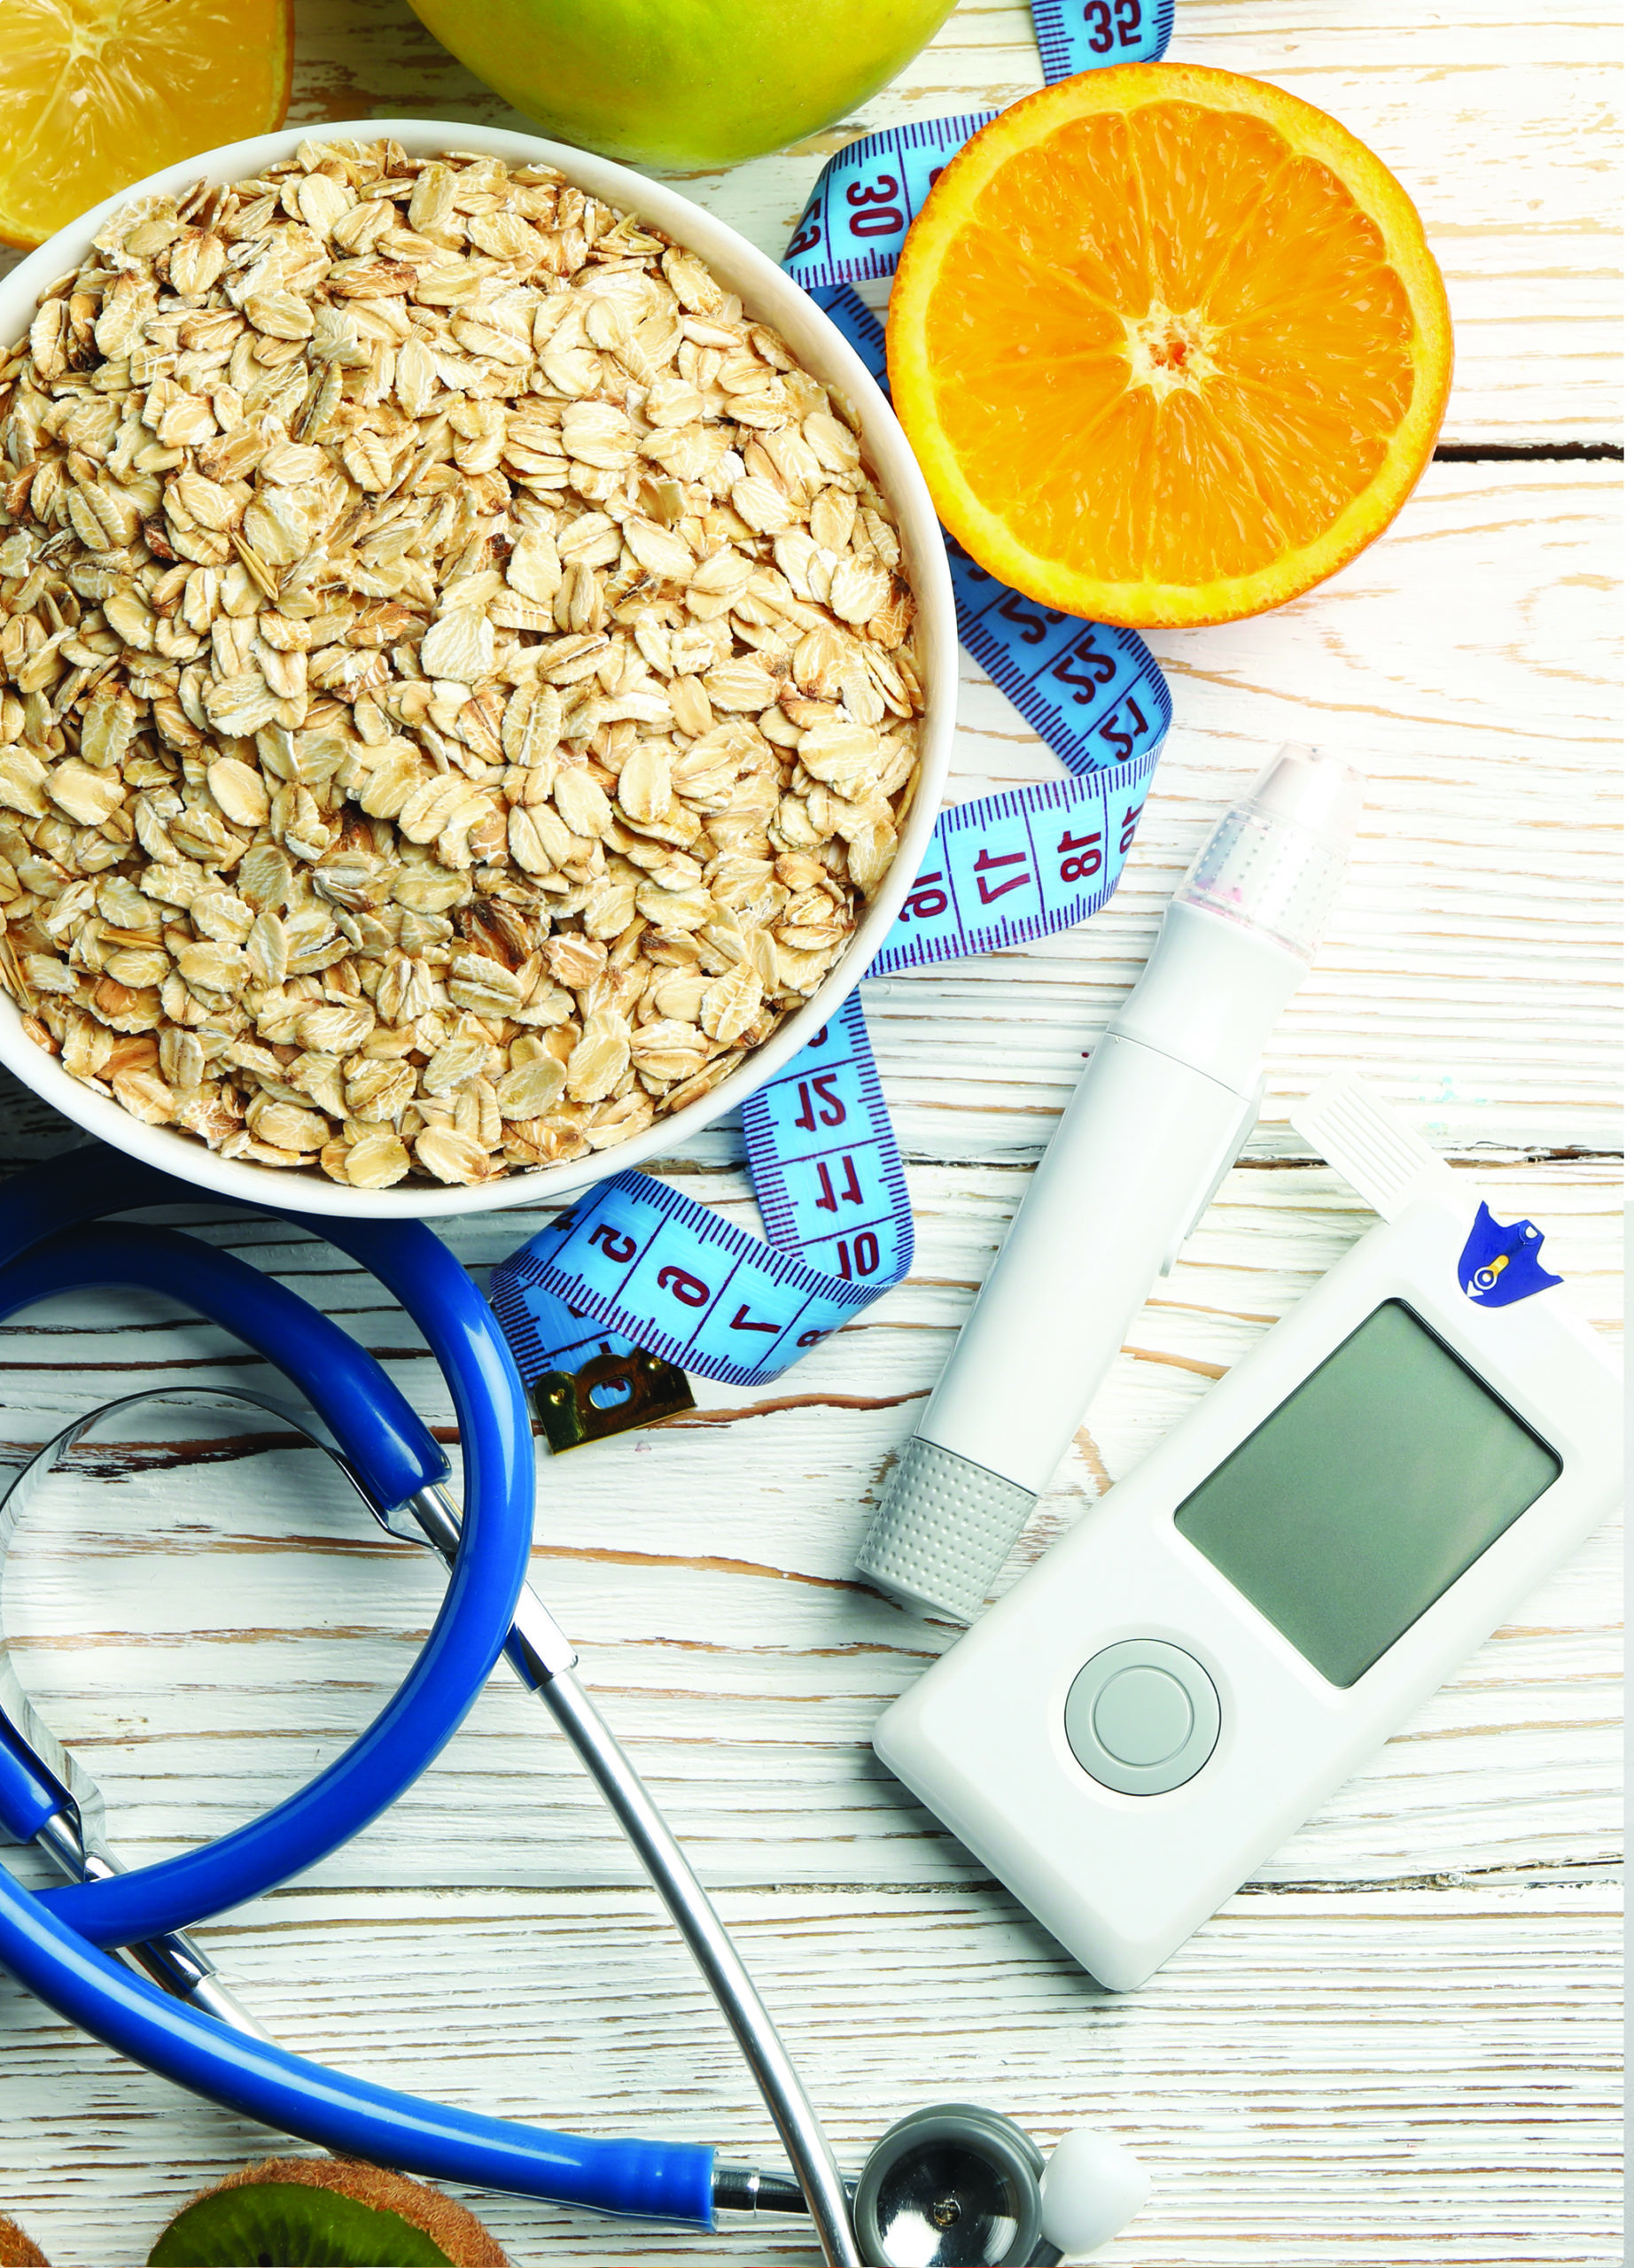 stethoscope tape measure diabetes testing devices and orange with oatmeal 